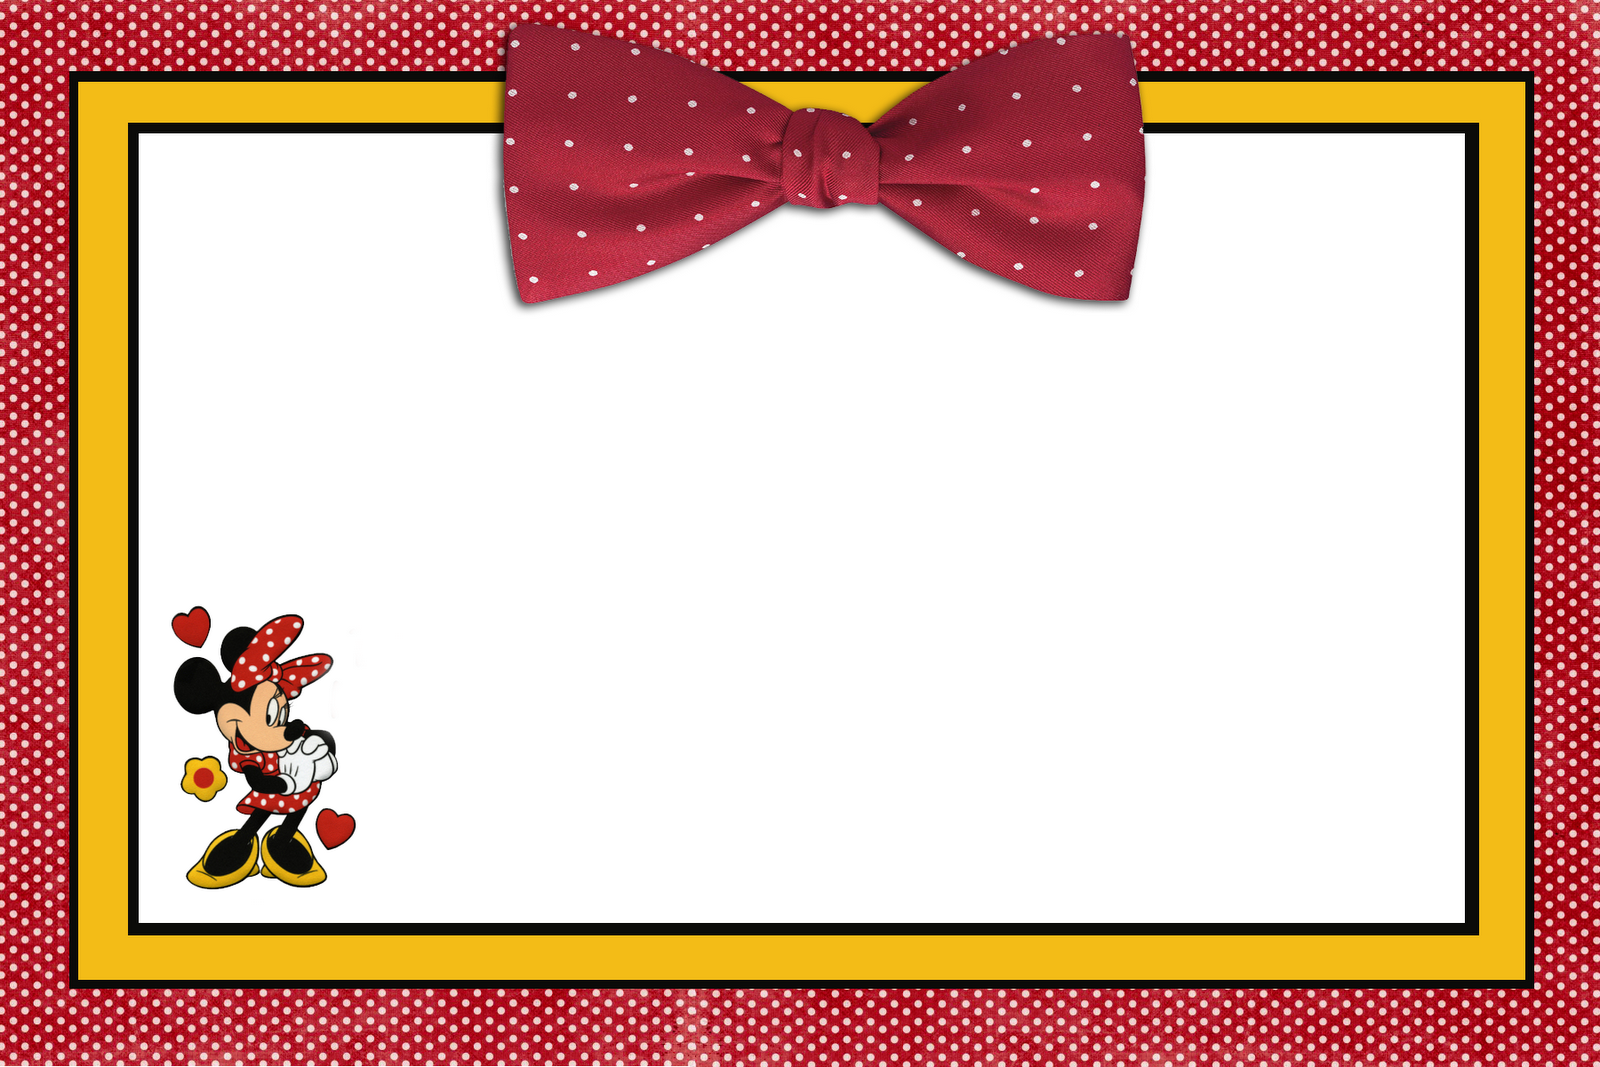 Kids Party Invitations backgrounds